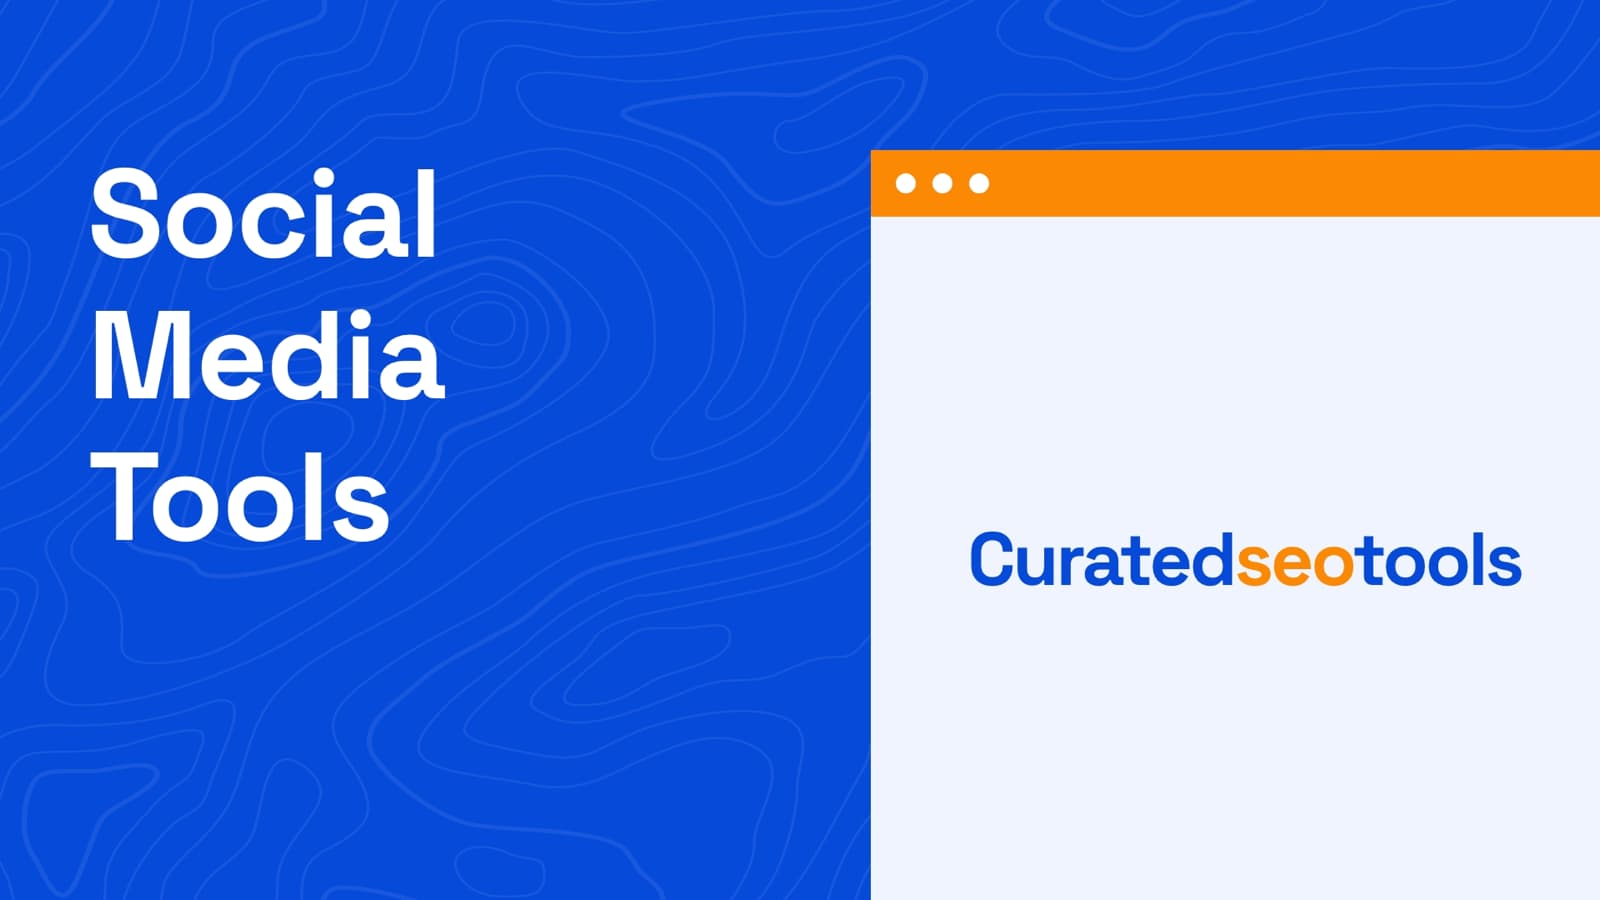 The cover image about the content title which is "Social Media Tools" and a browser shaped graphic element